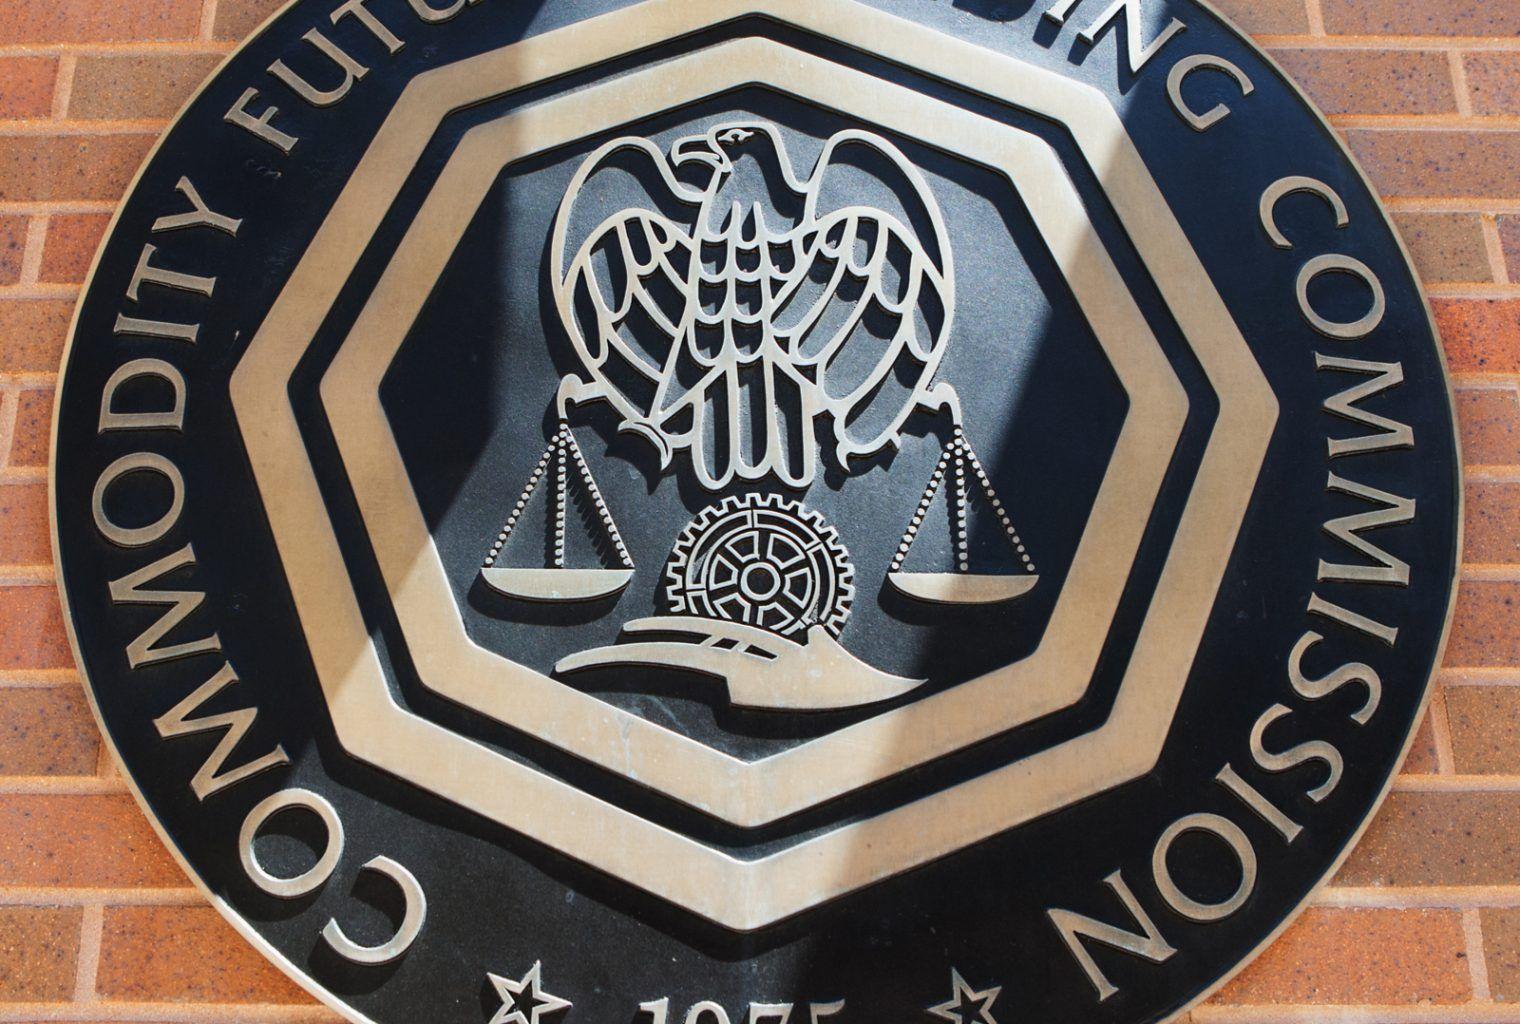 CFTC Logo - Virtual Currencies to Become 